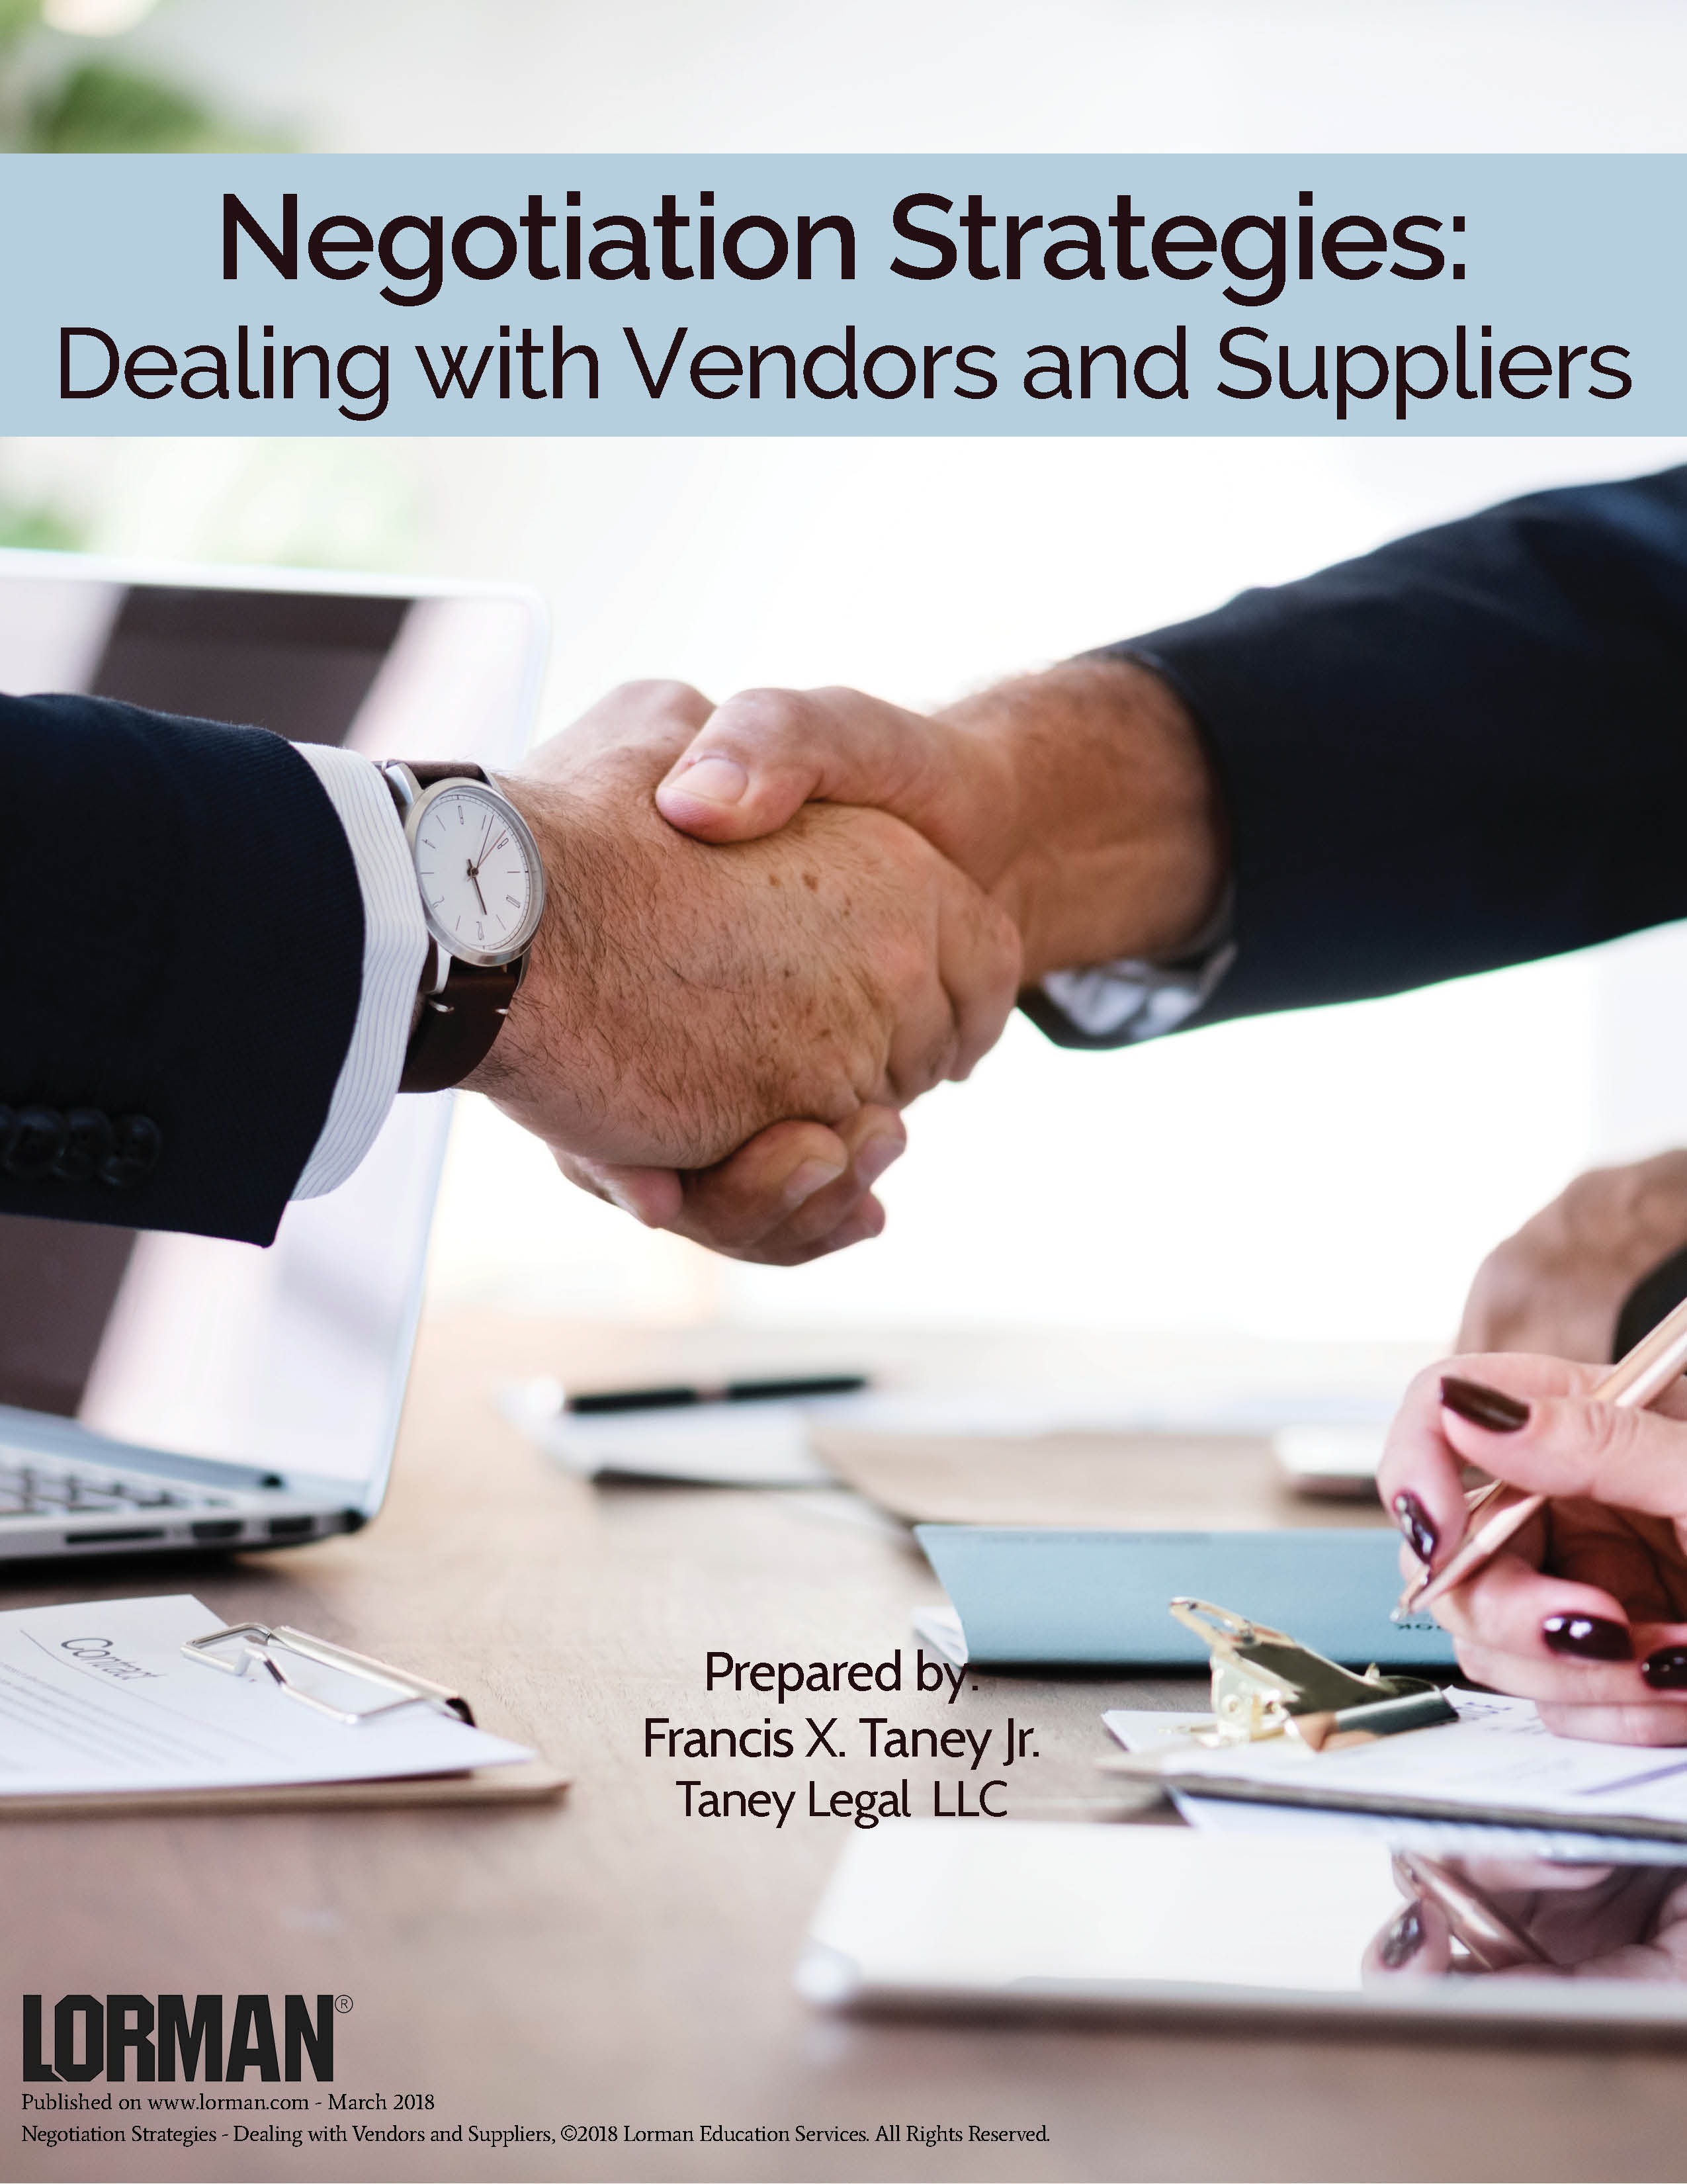 Negotiation Strategies: Dealing with Vendors and Suppliers